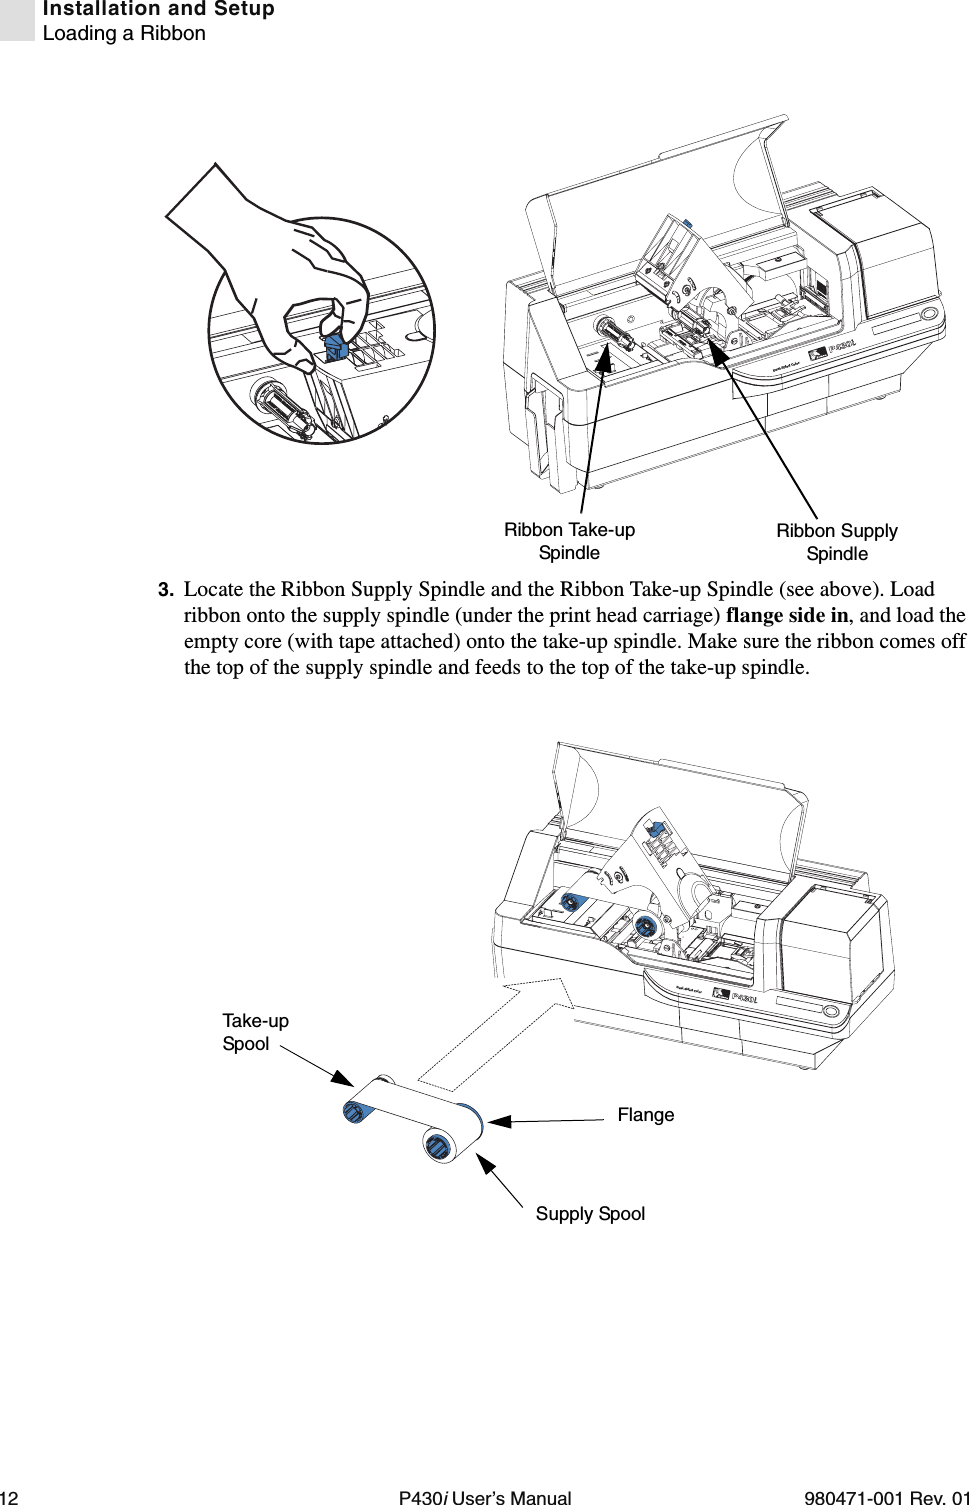 12 P430i User’s Manual 980471-001 Rev. 01Installation and SetupLoading a Ribbon3. Locate the Ribbon Supply Spindle and the Ribbon Take-up Spindle (see above). Load ribbon onto the supply spindle (under the print head carriage) flange side in, and load the empty core (with tape attached) onto the take-up spindle. Make sure the ribbon comes off the top of the supply spindle and feeds to the top of the take-up spindle.Dual-Sided ColorRibbon Supply SpindleRibbon Take-up SpindleDual-Sided ColorFlangeSupply SpoolTa k e -u p Spool